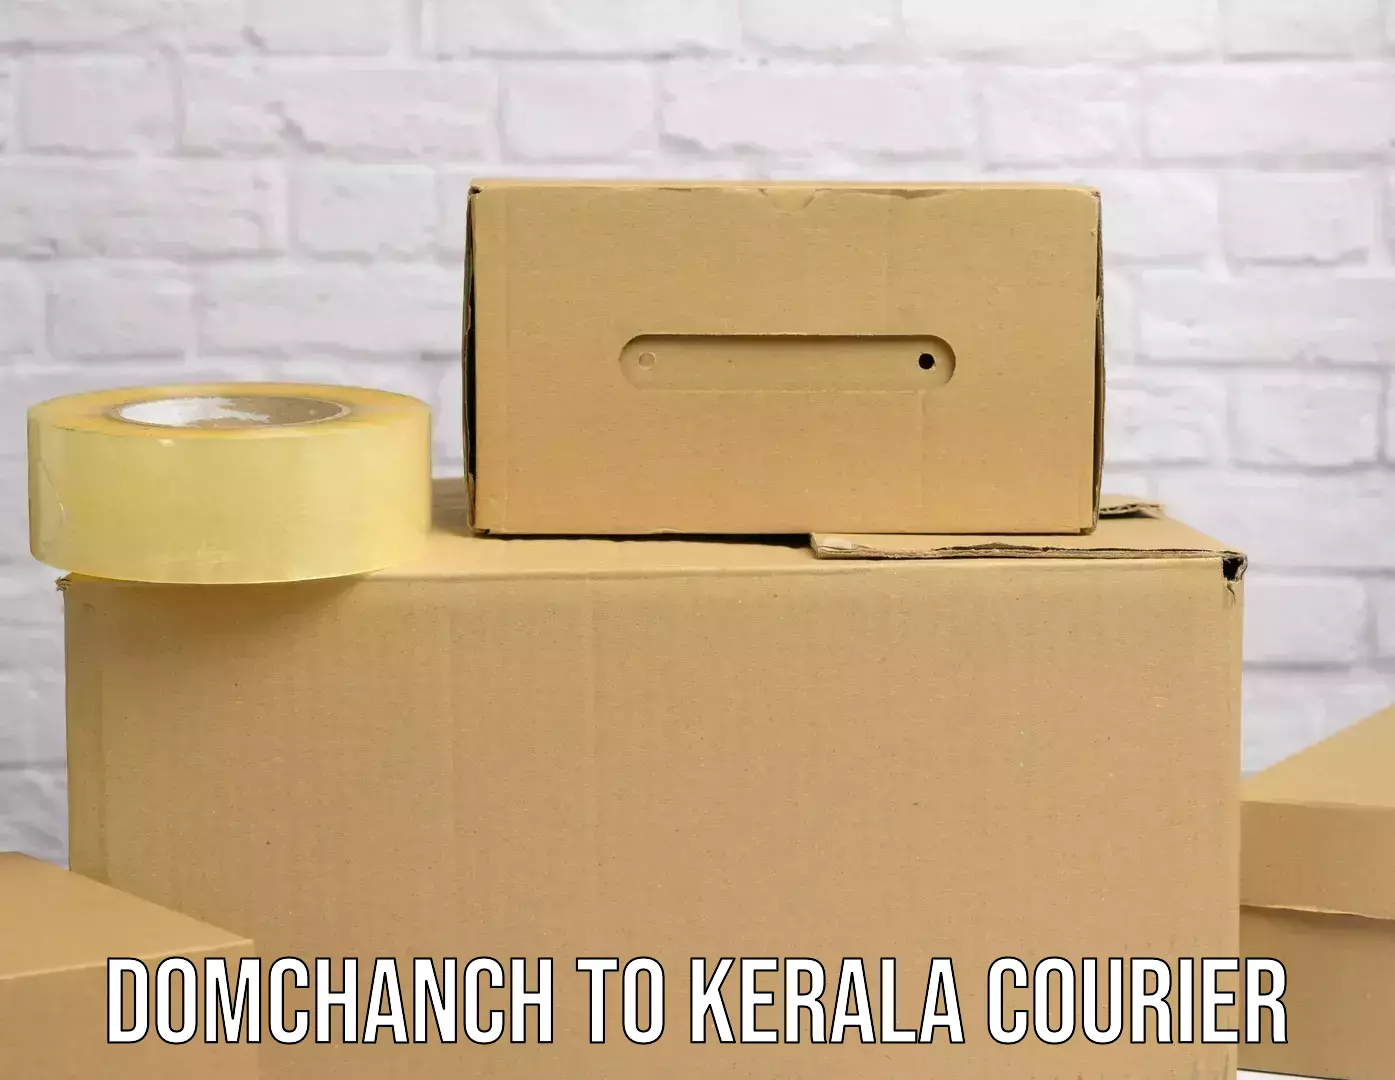 Advanced parcel tracking Domchanch to Kerala